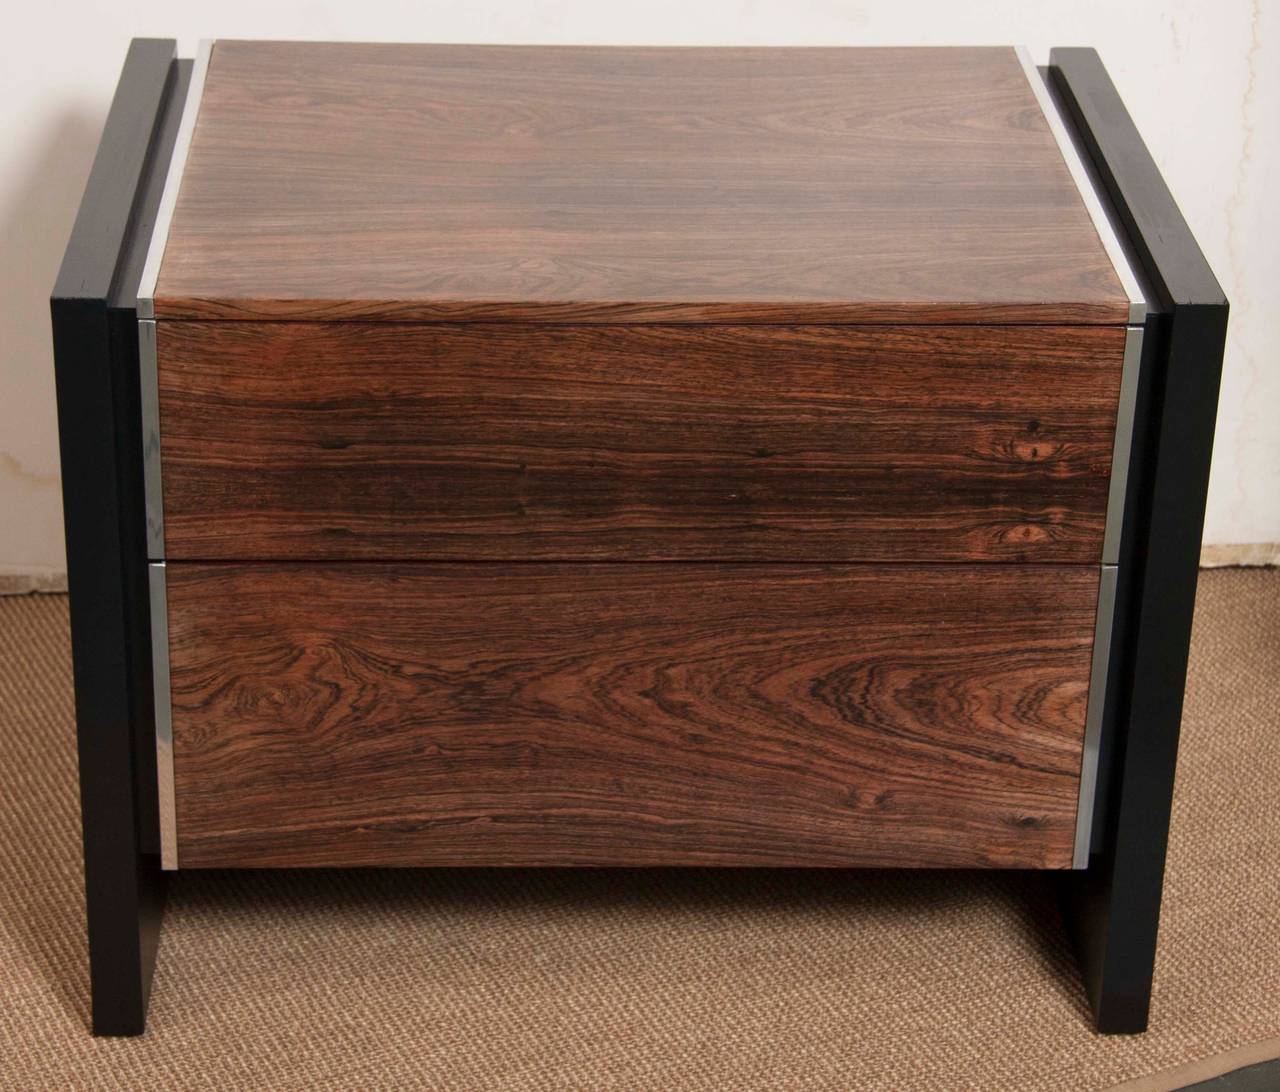 A pair of sleek two-drawer, rosewood with black lacquered sides, nightstands by John Stuart of Grand Rapids, MI.